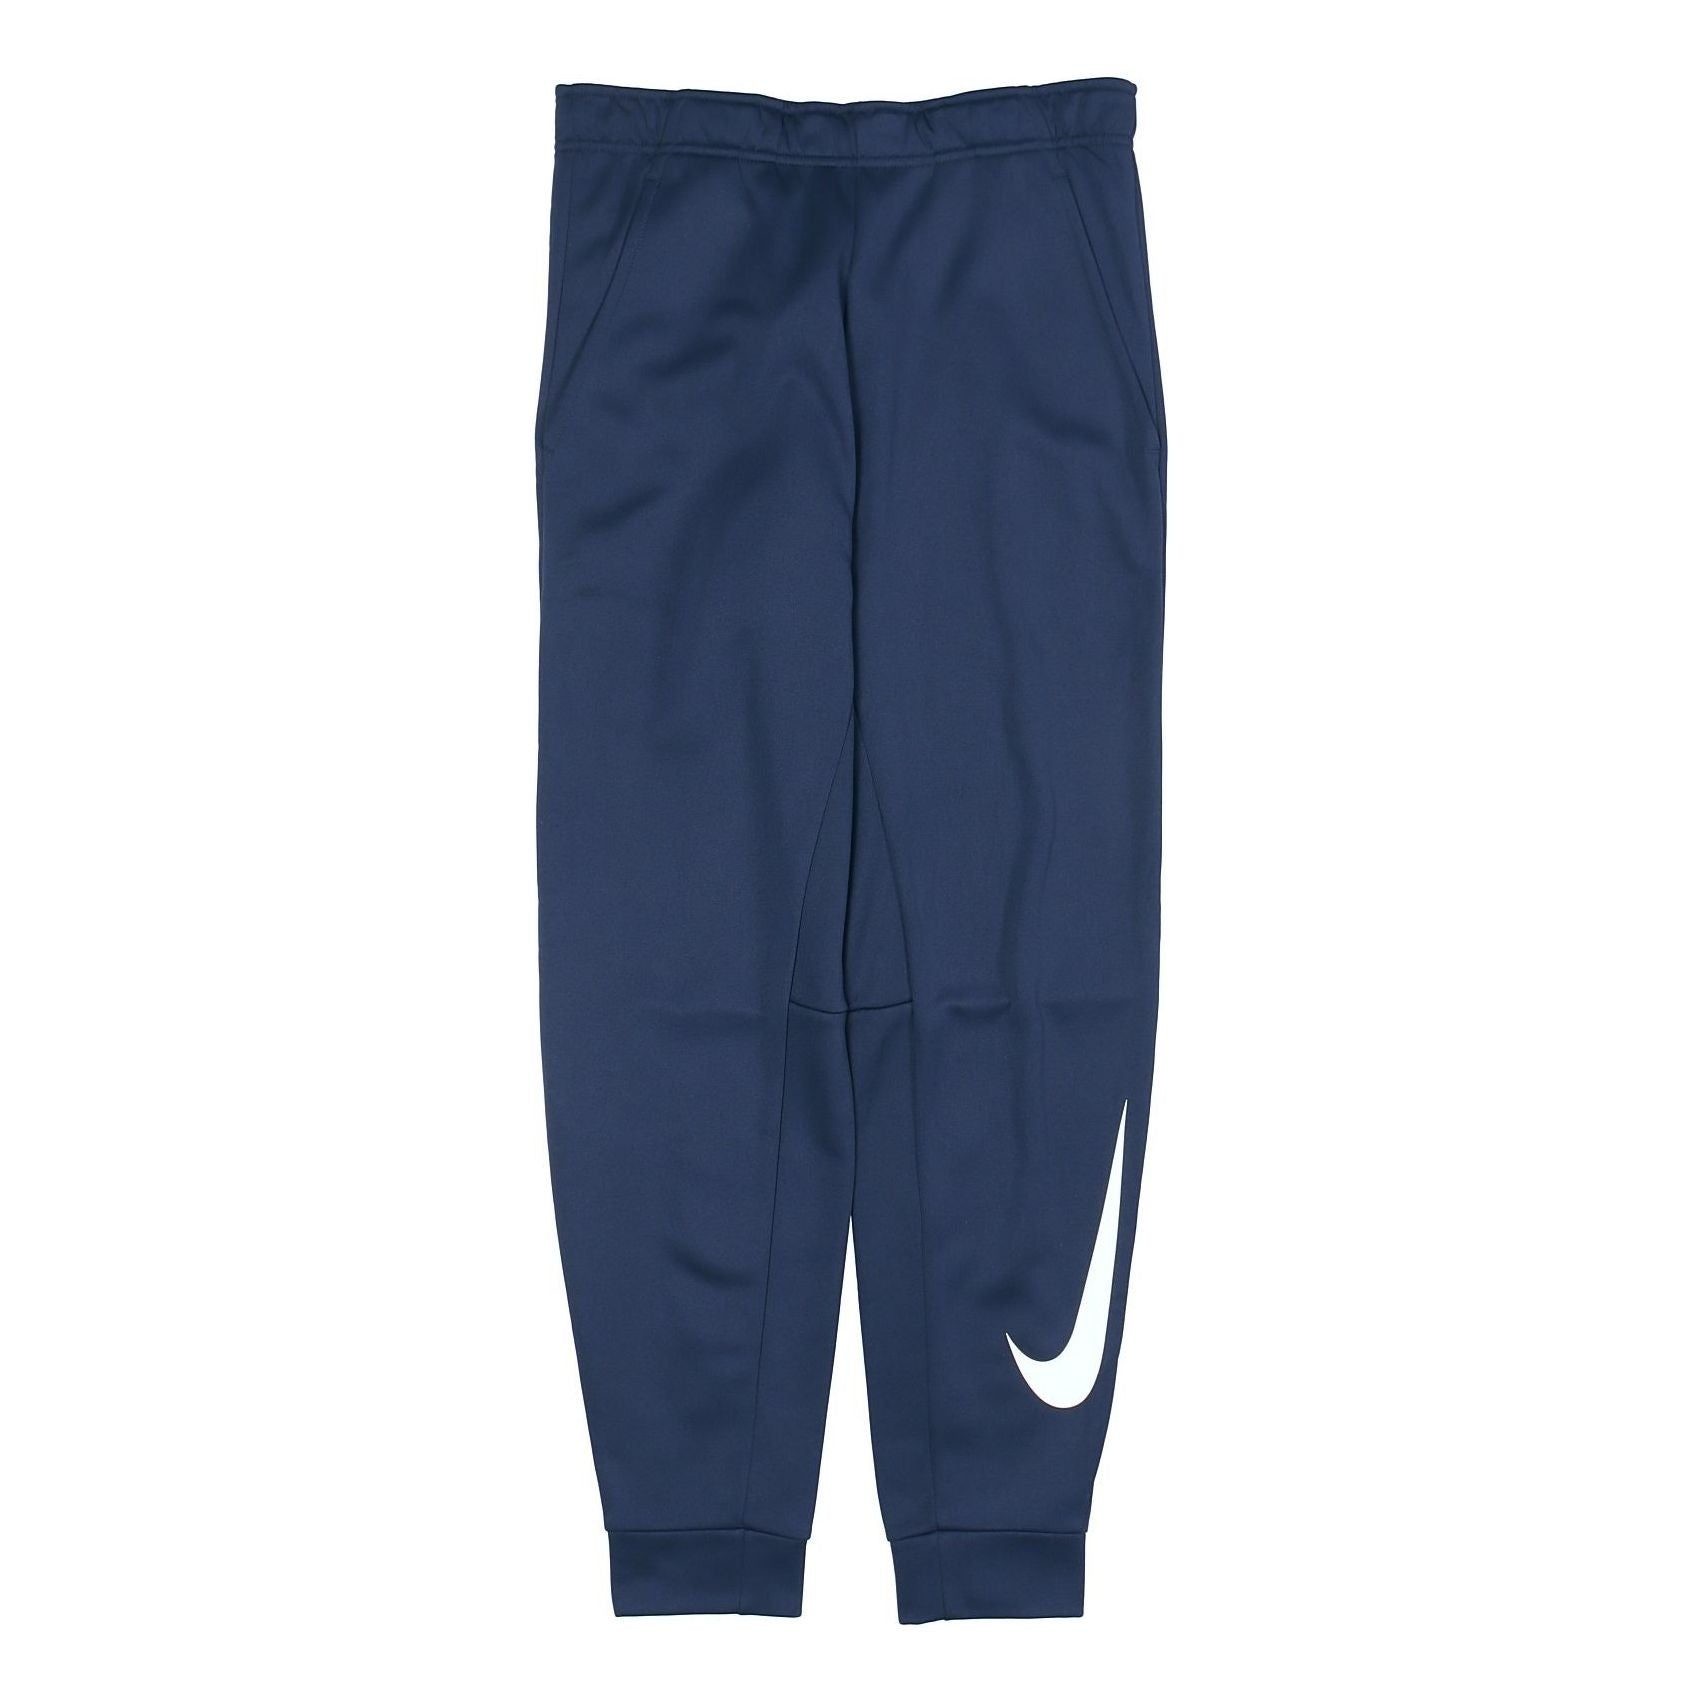 Nike Therma Tapered Training logo Long Sports Pants Obsidian Color Black 932258-451 - 1